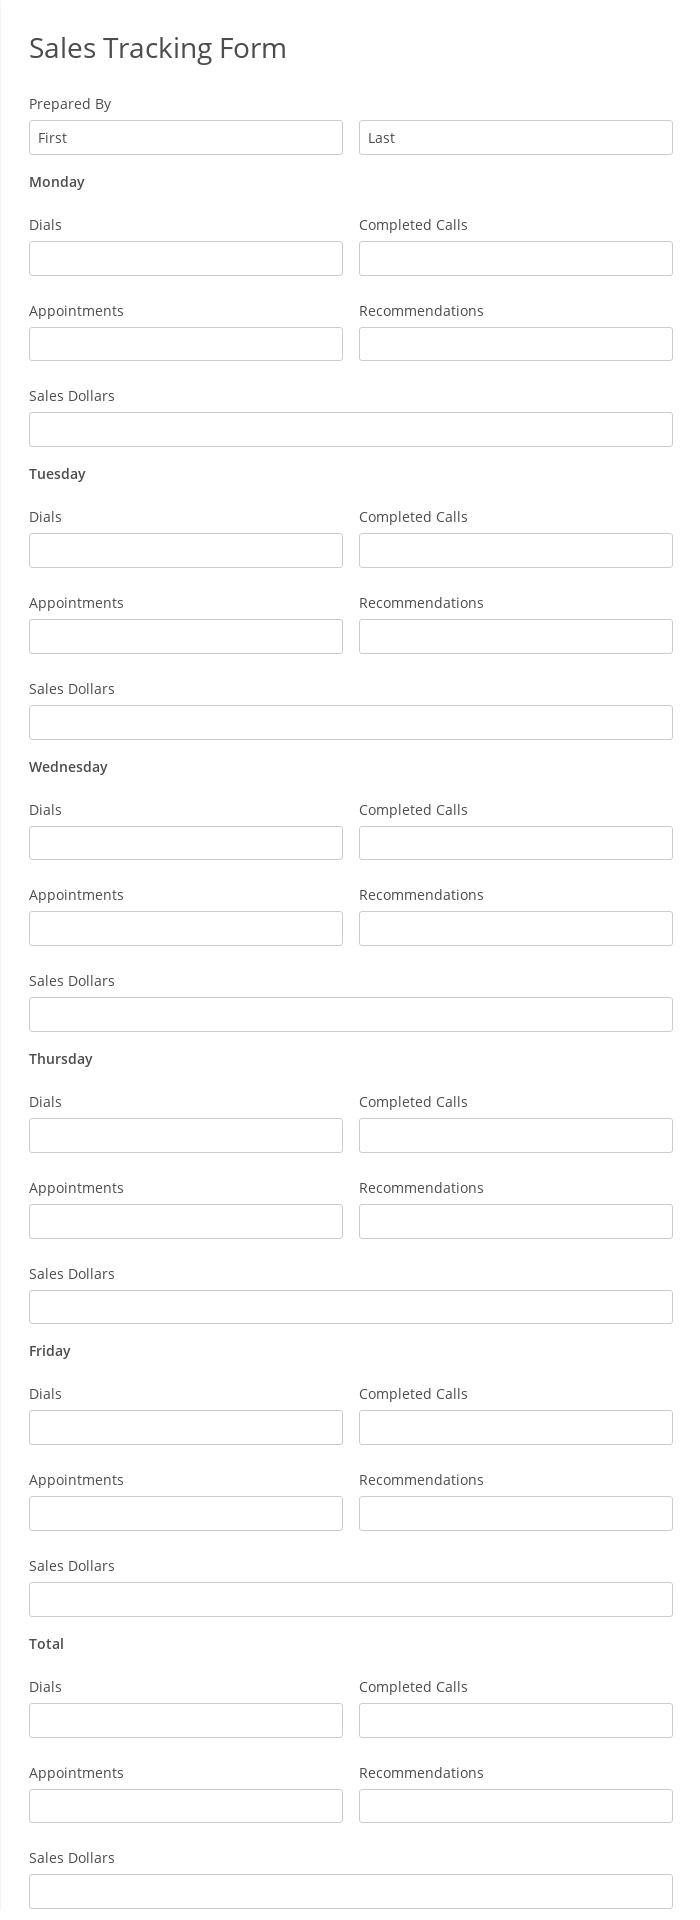 Sales Tracking Form